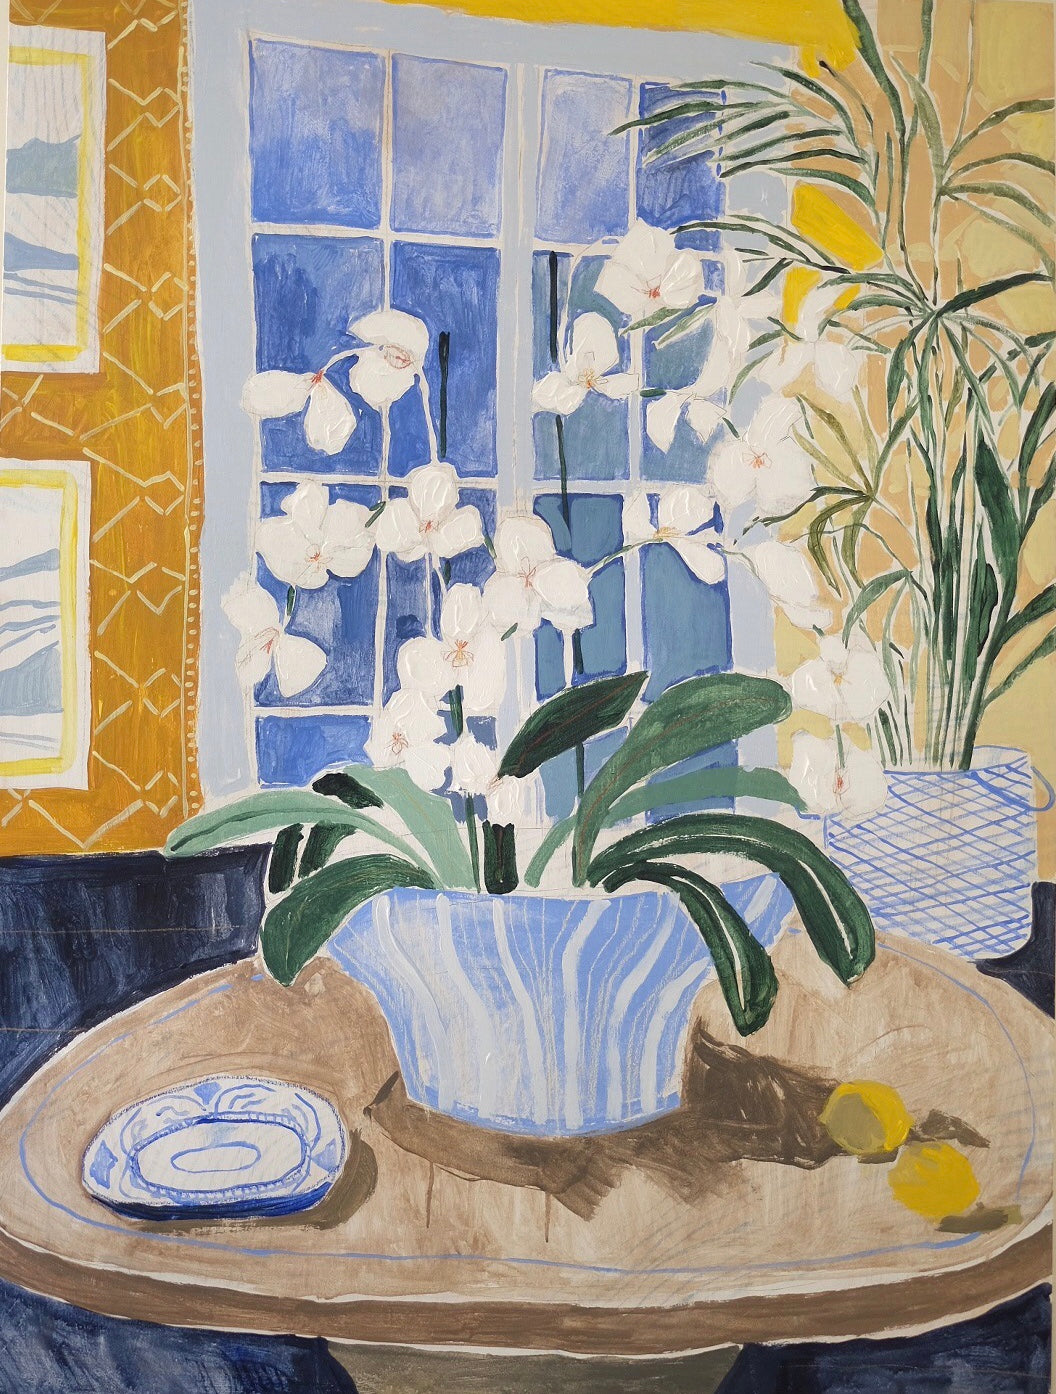 Potted Orchid No. 17 - 36 x 48